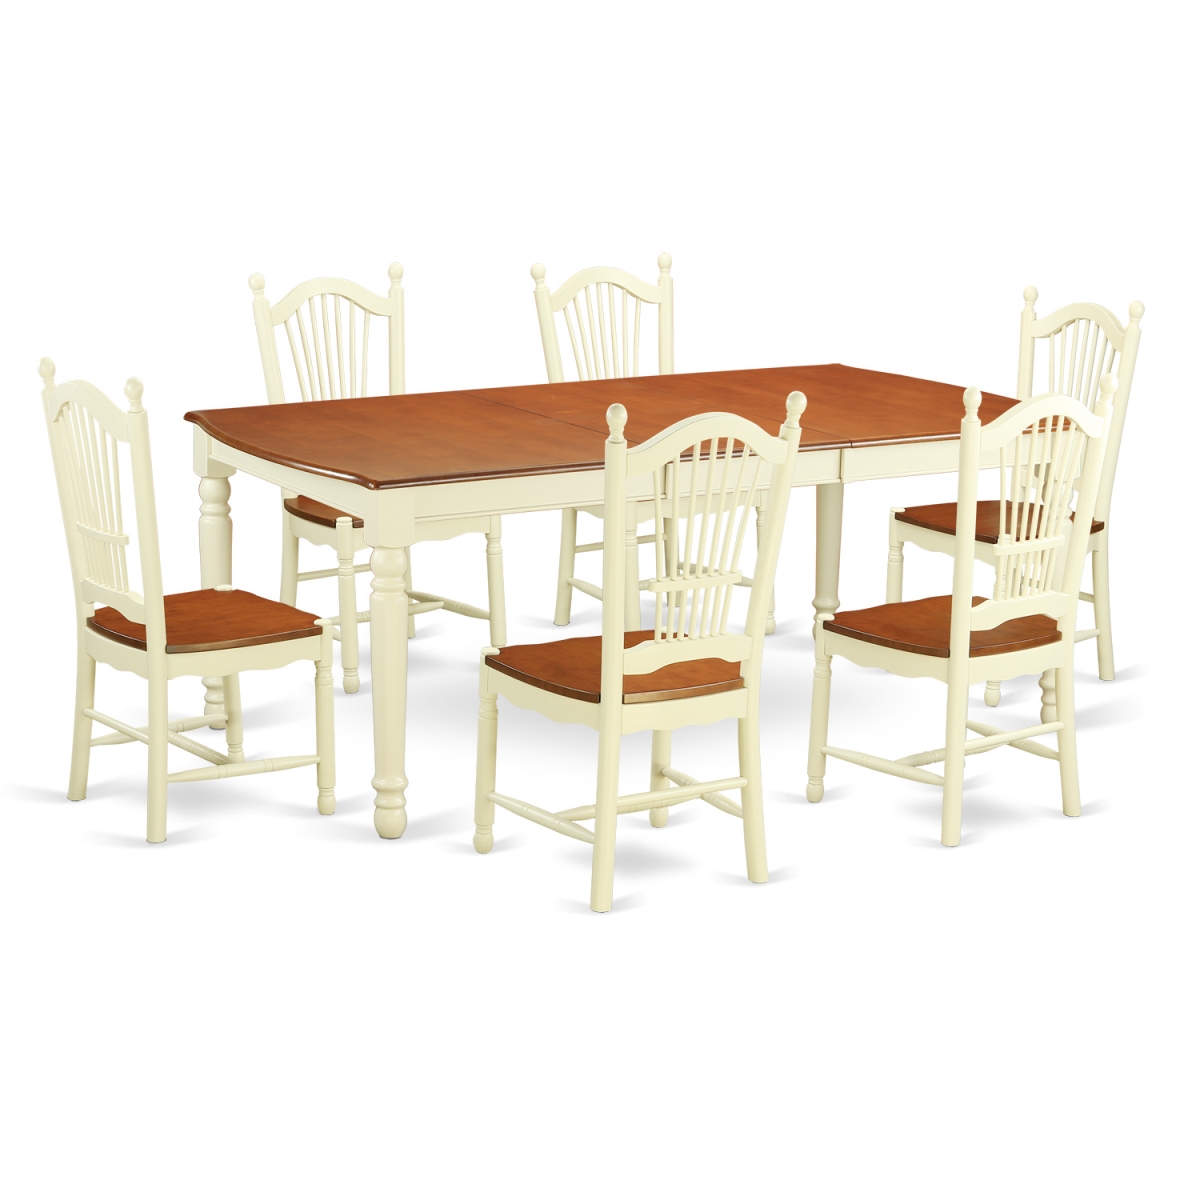 Dove7-whi-w Dinette Table Set With 6 Table & 6 Chairs, Linen White - 7 Piece